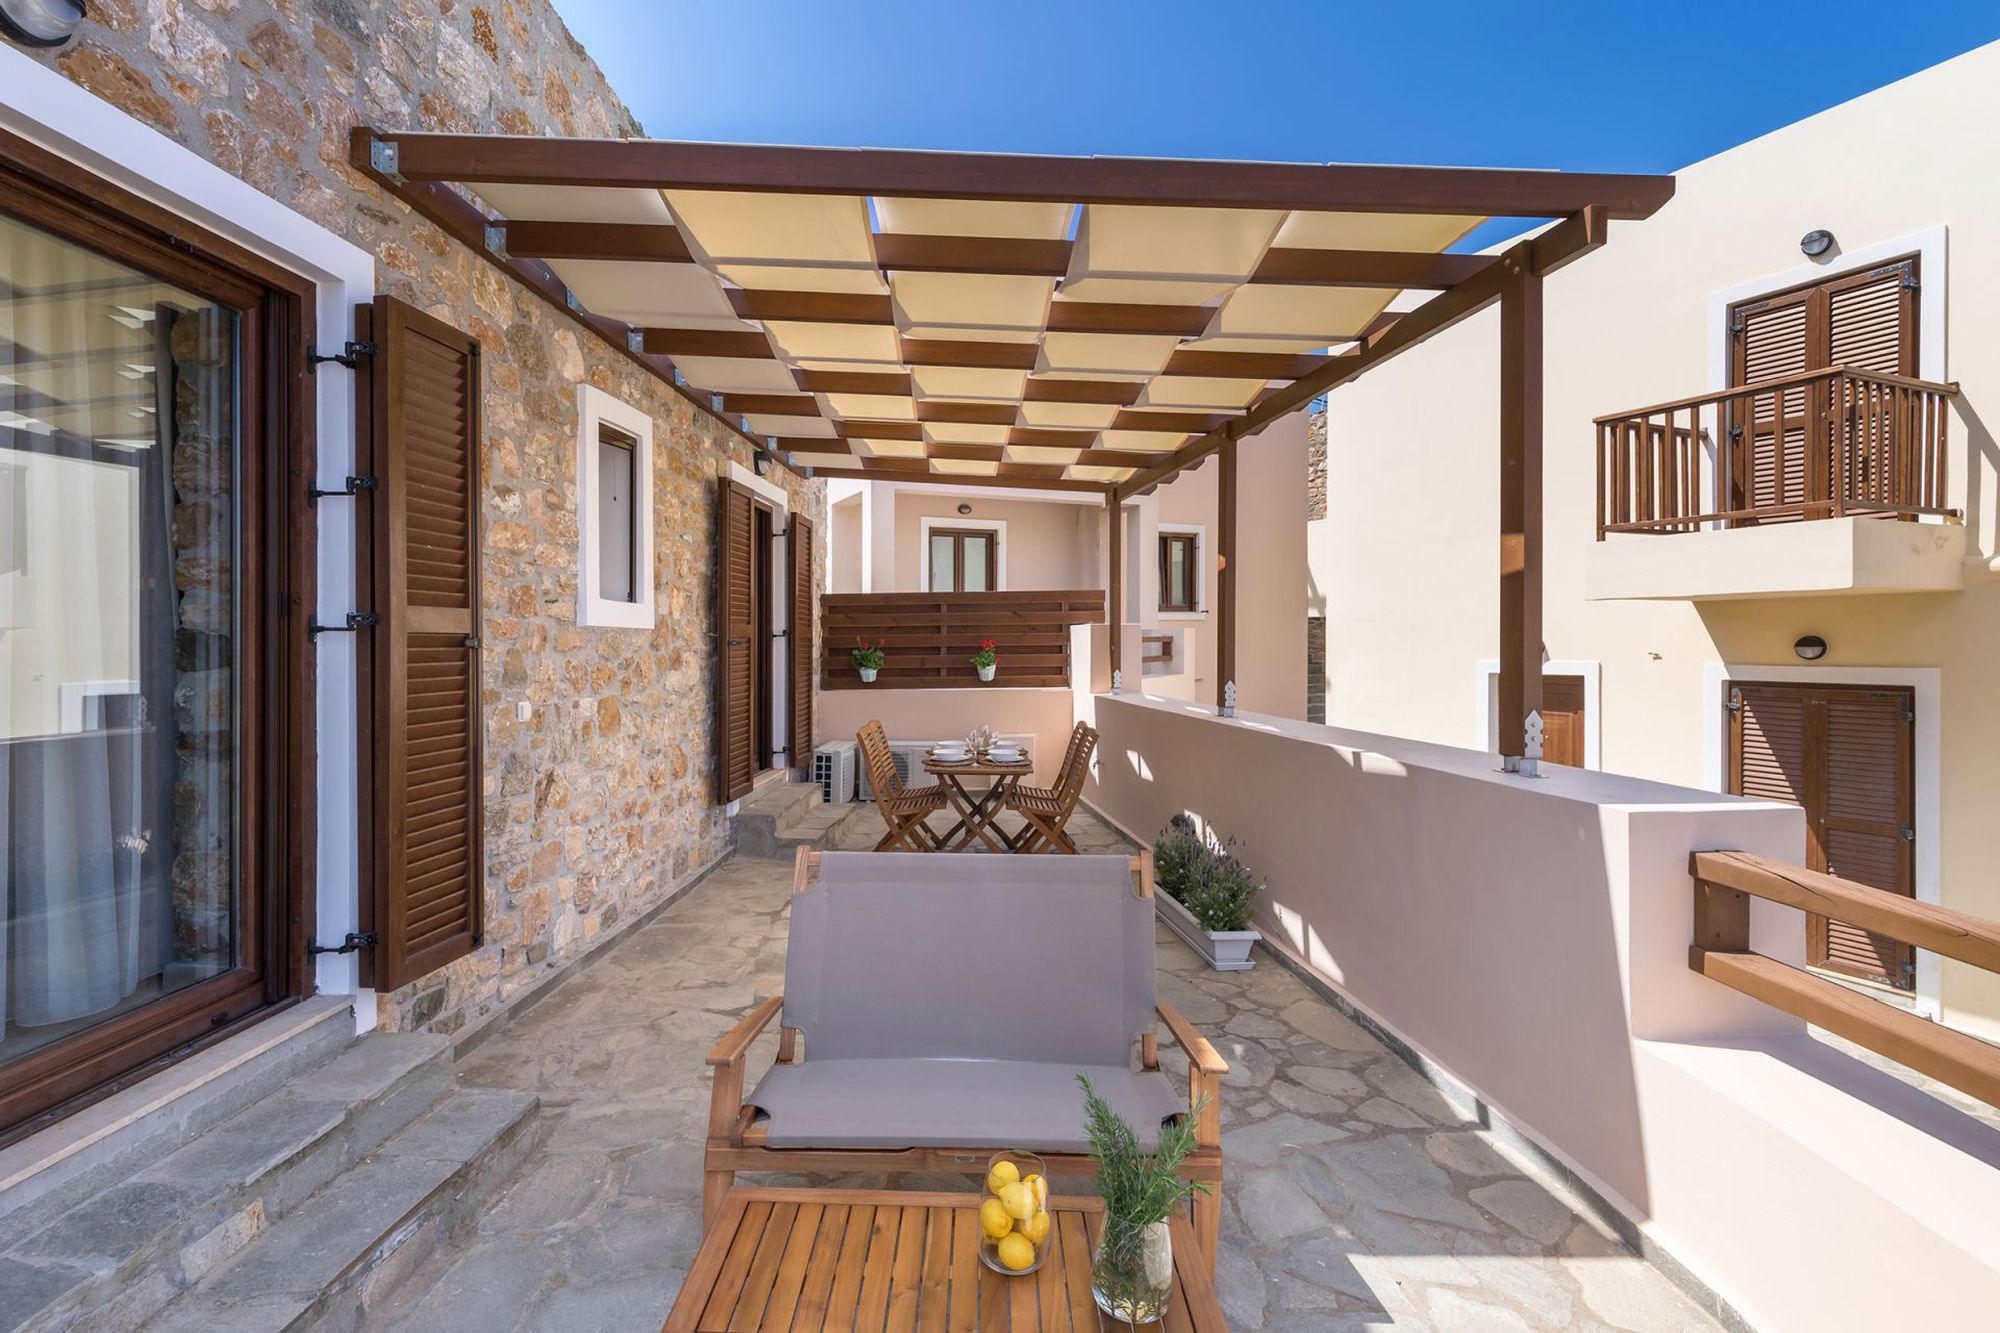 Veranda of a stone-built residence with pergola, furnished with a dining table and a lounge.